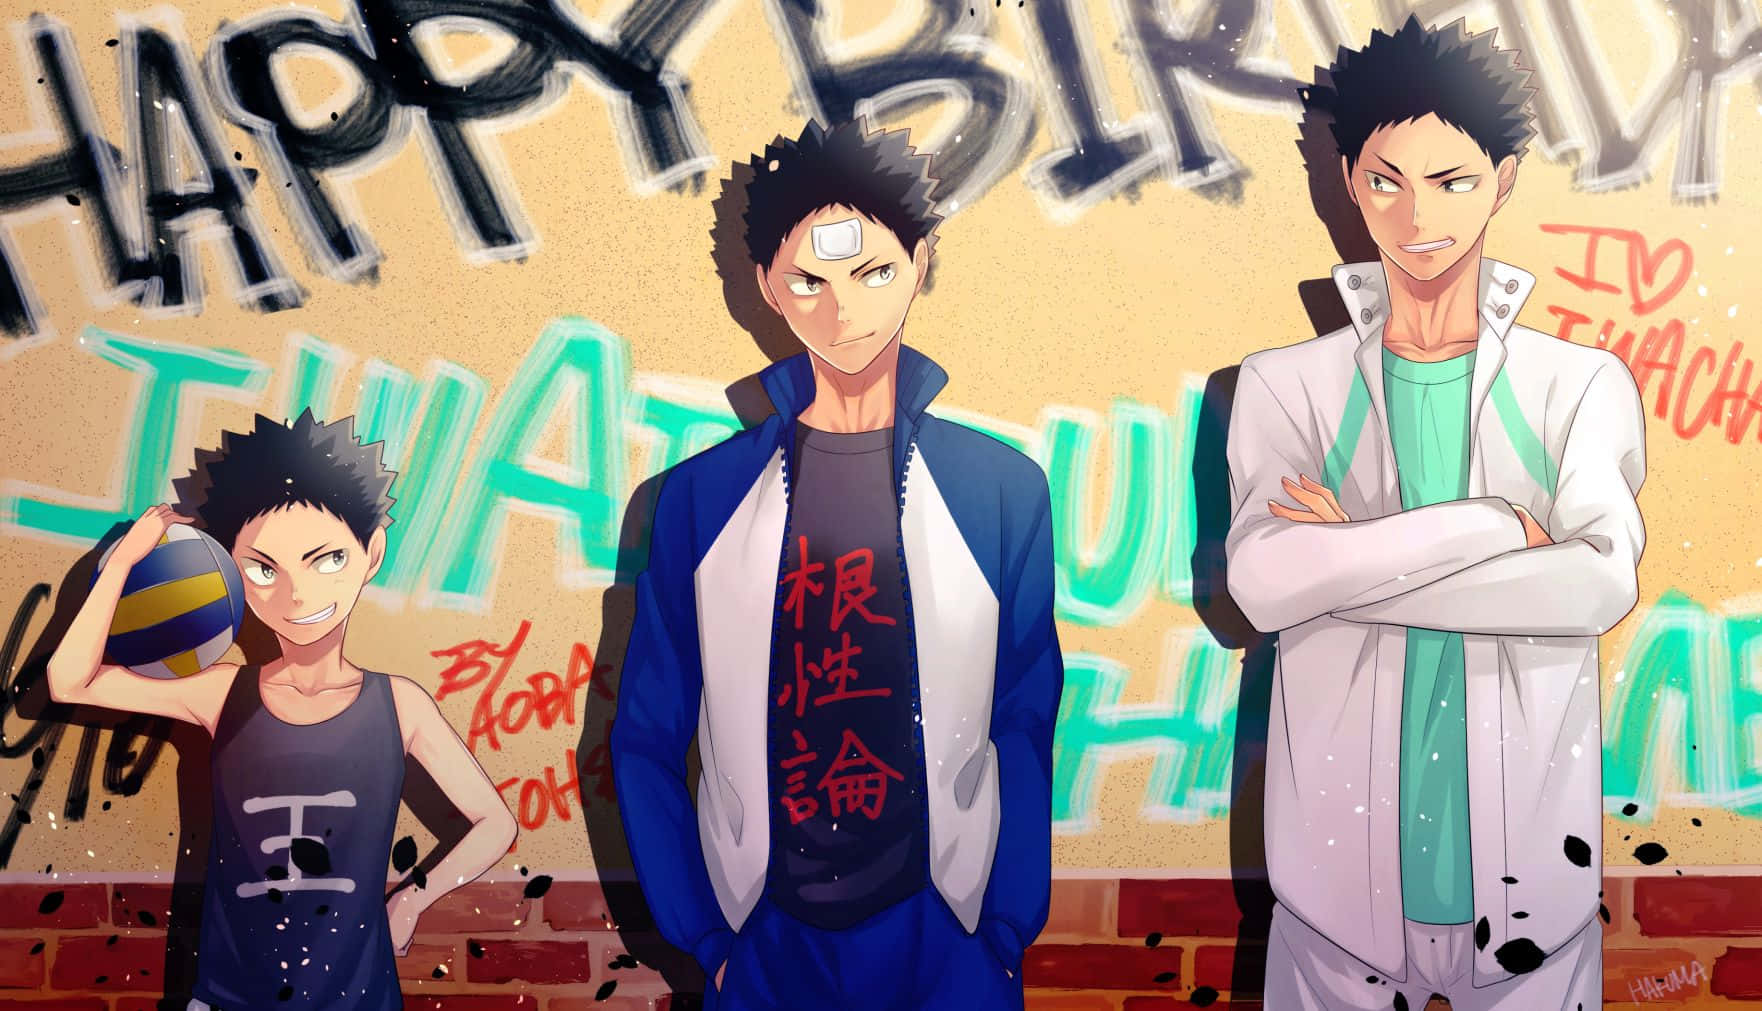 Iwaizumi Hajime Striking A Powerful Pose In A Cool And Dynamic Setting Background